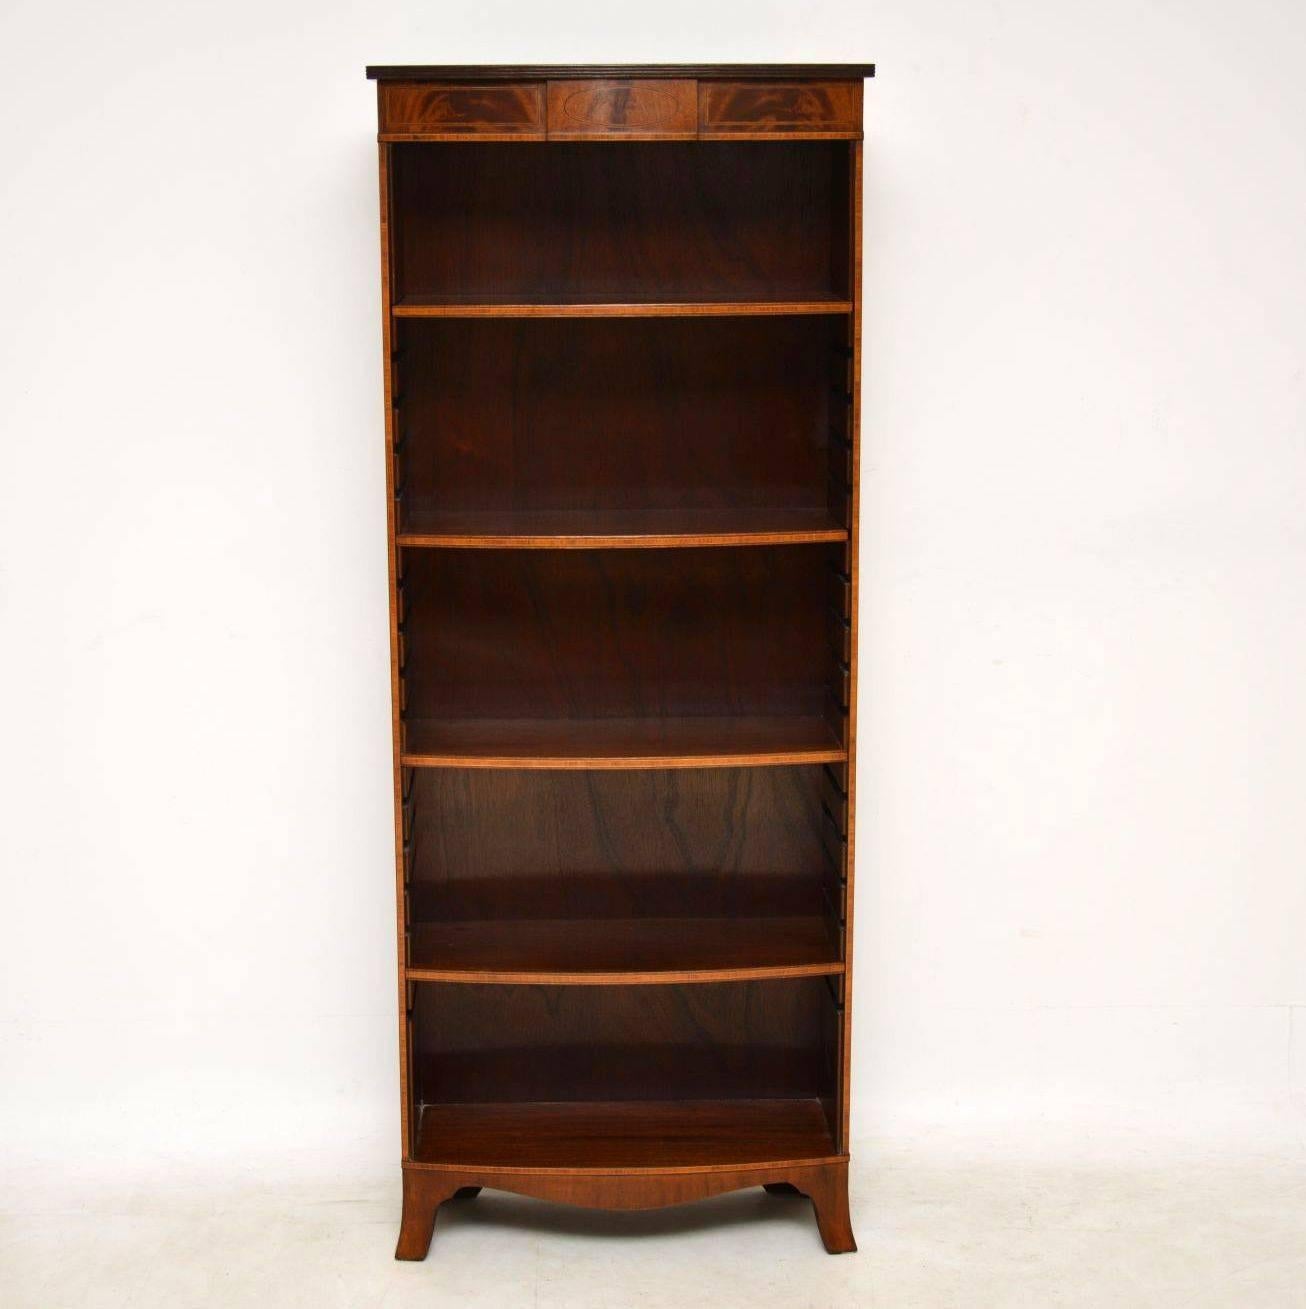 Very smart antique open mahogany bookcase of fine quality, with some lovely features and of small proportions. It’s bow fronted with a reeded top over a flame mahogany panel with various inlays. The mahogany shelves are all adjustable and slot into